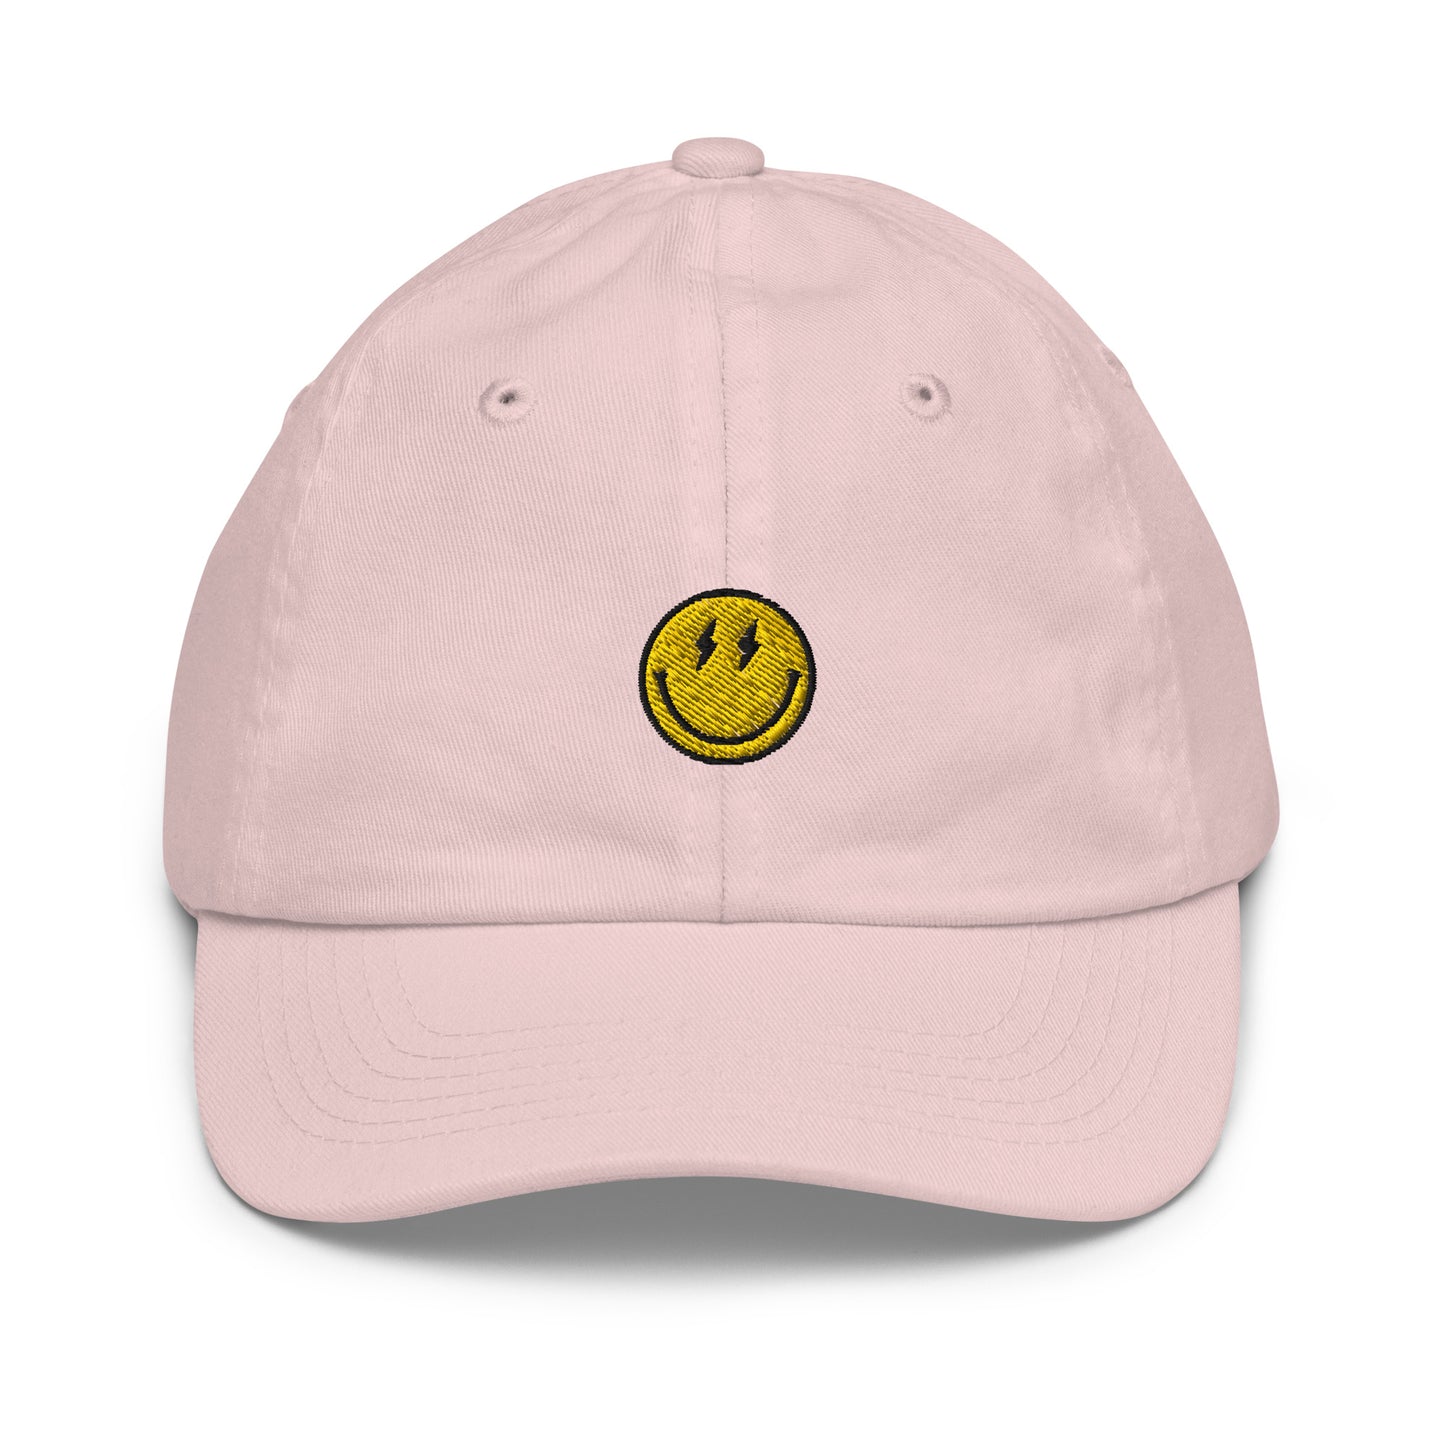 Yellow smiley youth hat